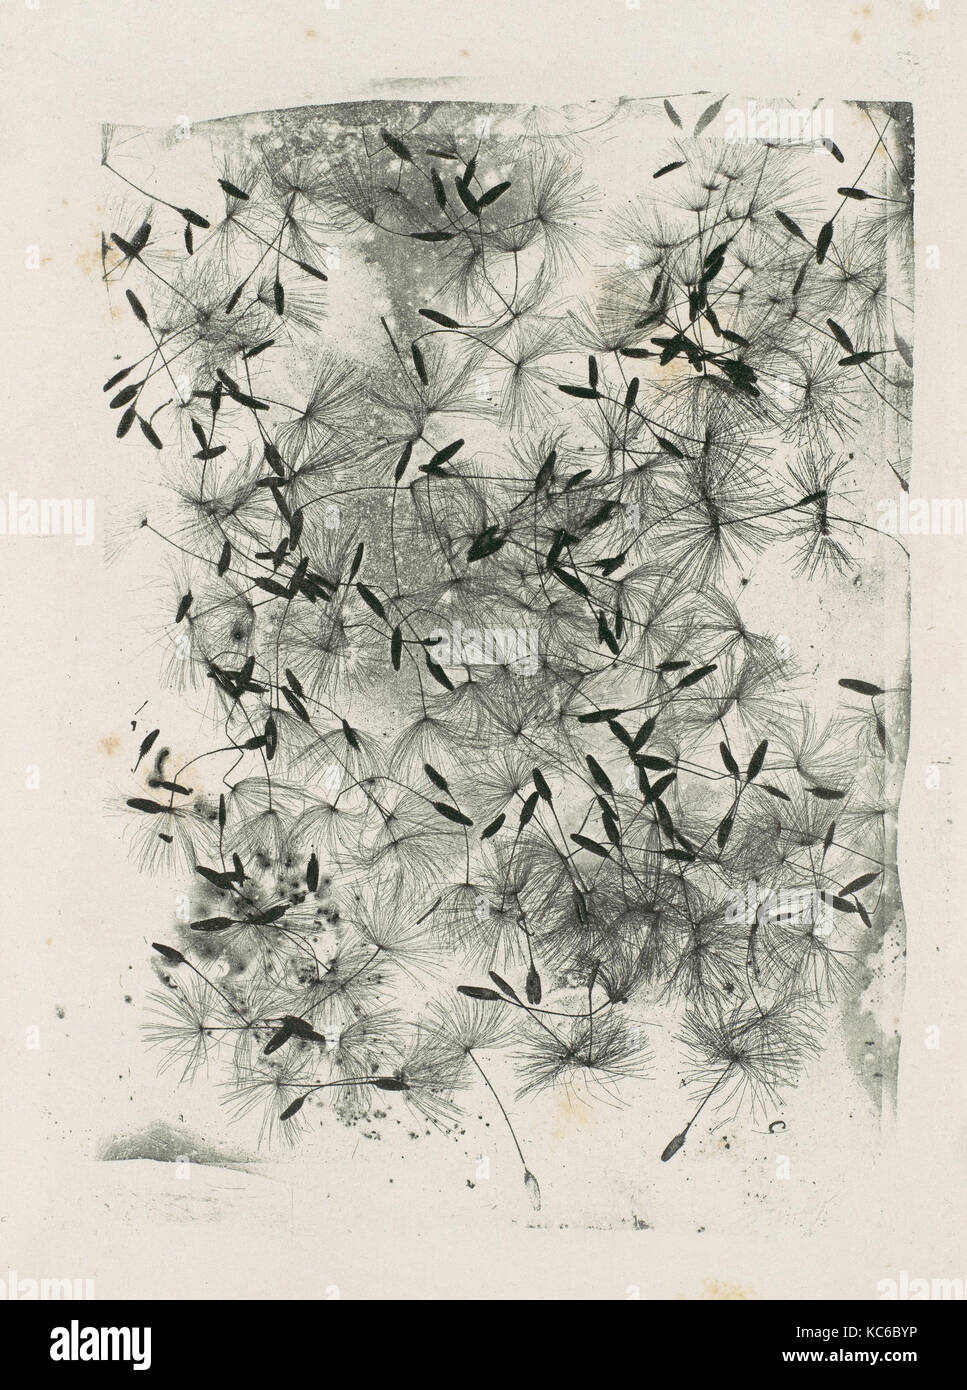 Dandelion Seeds, William Henry Fox Talbot, 1858 or later Stock Photo